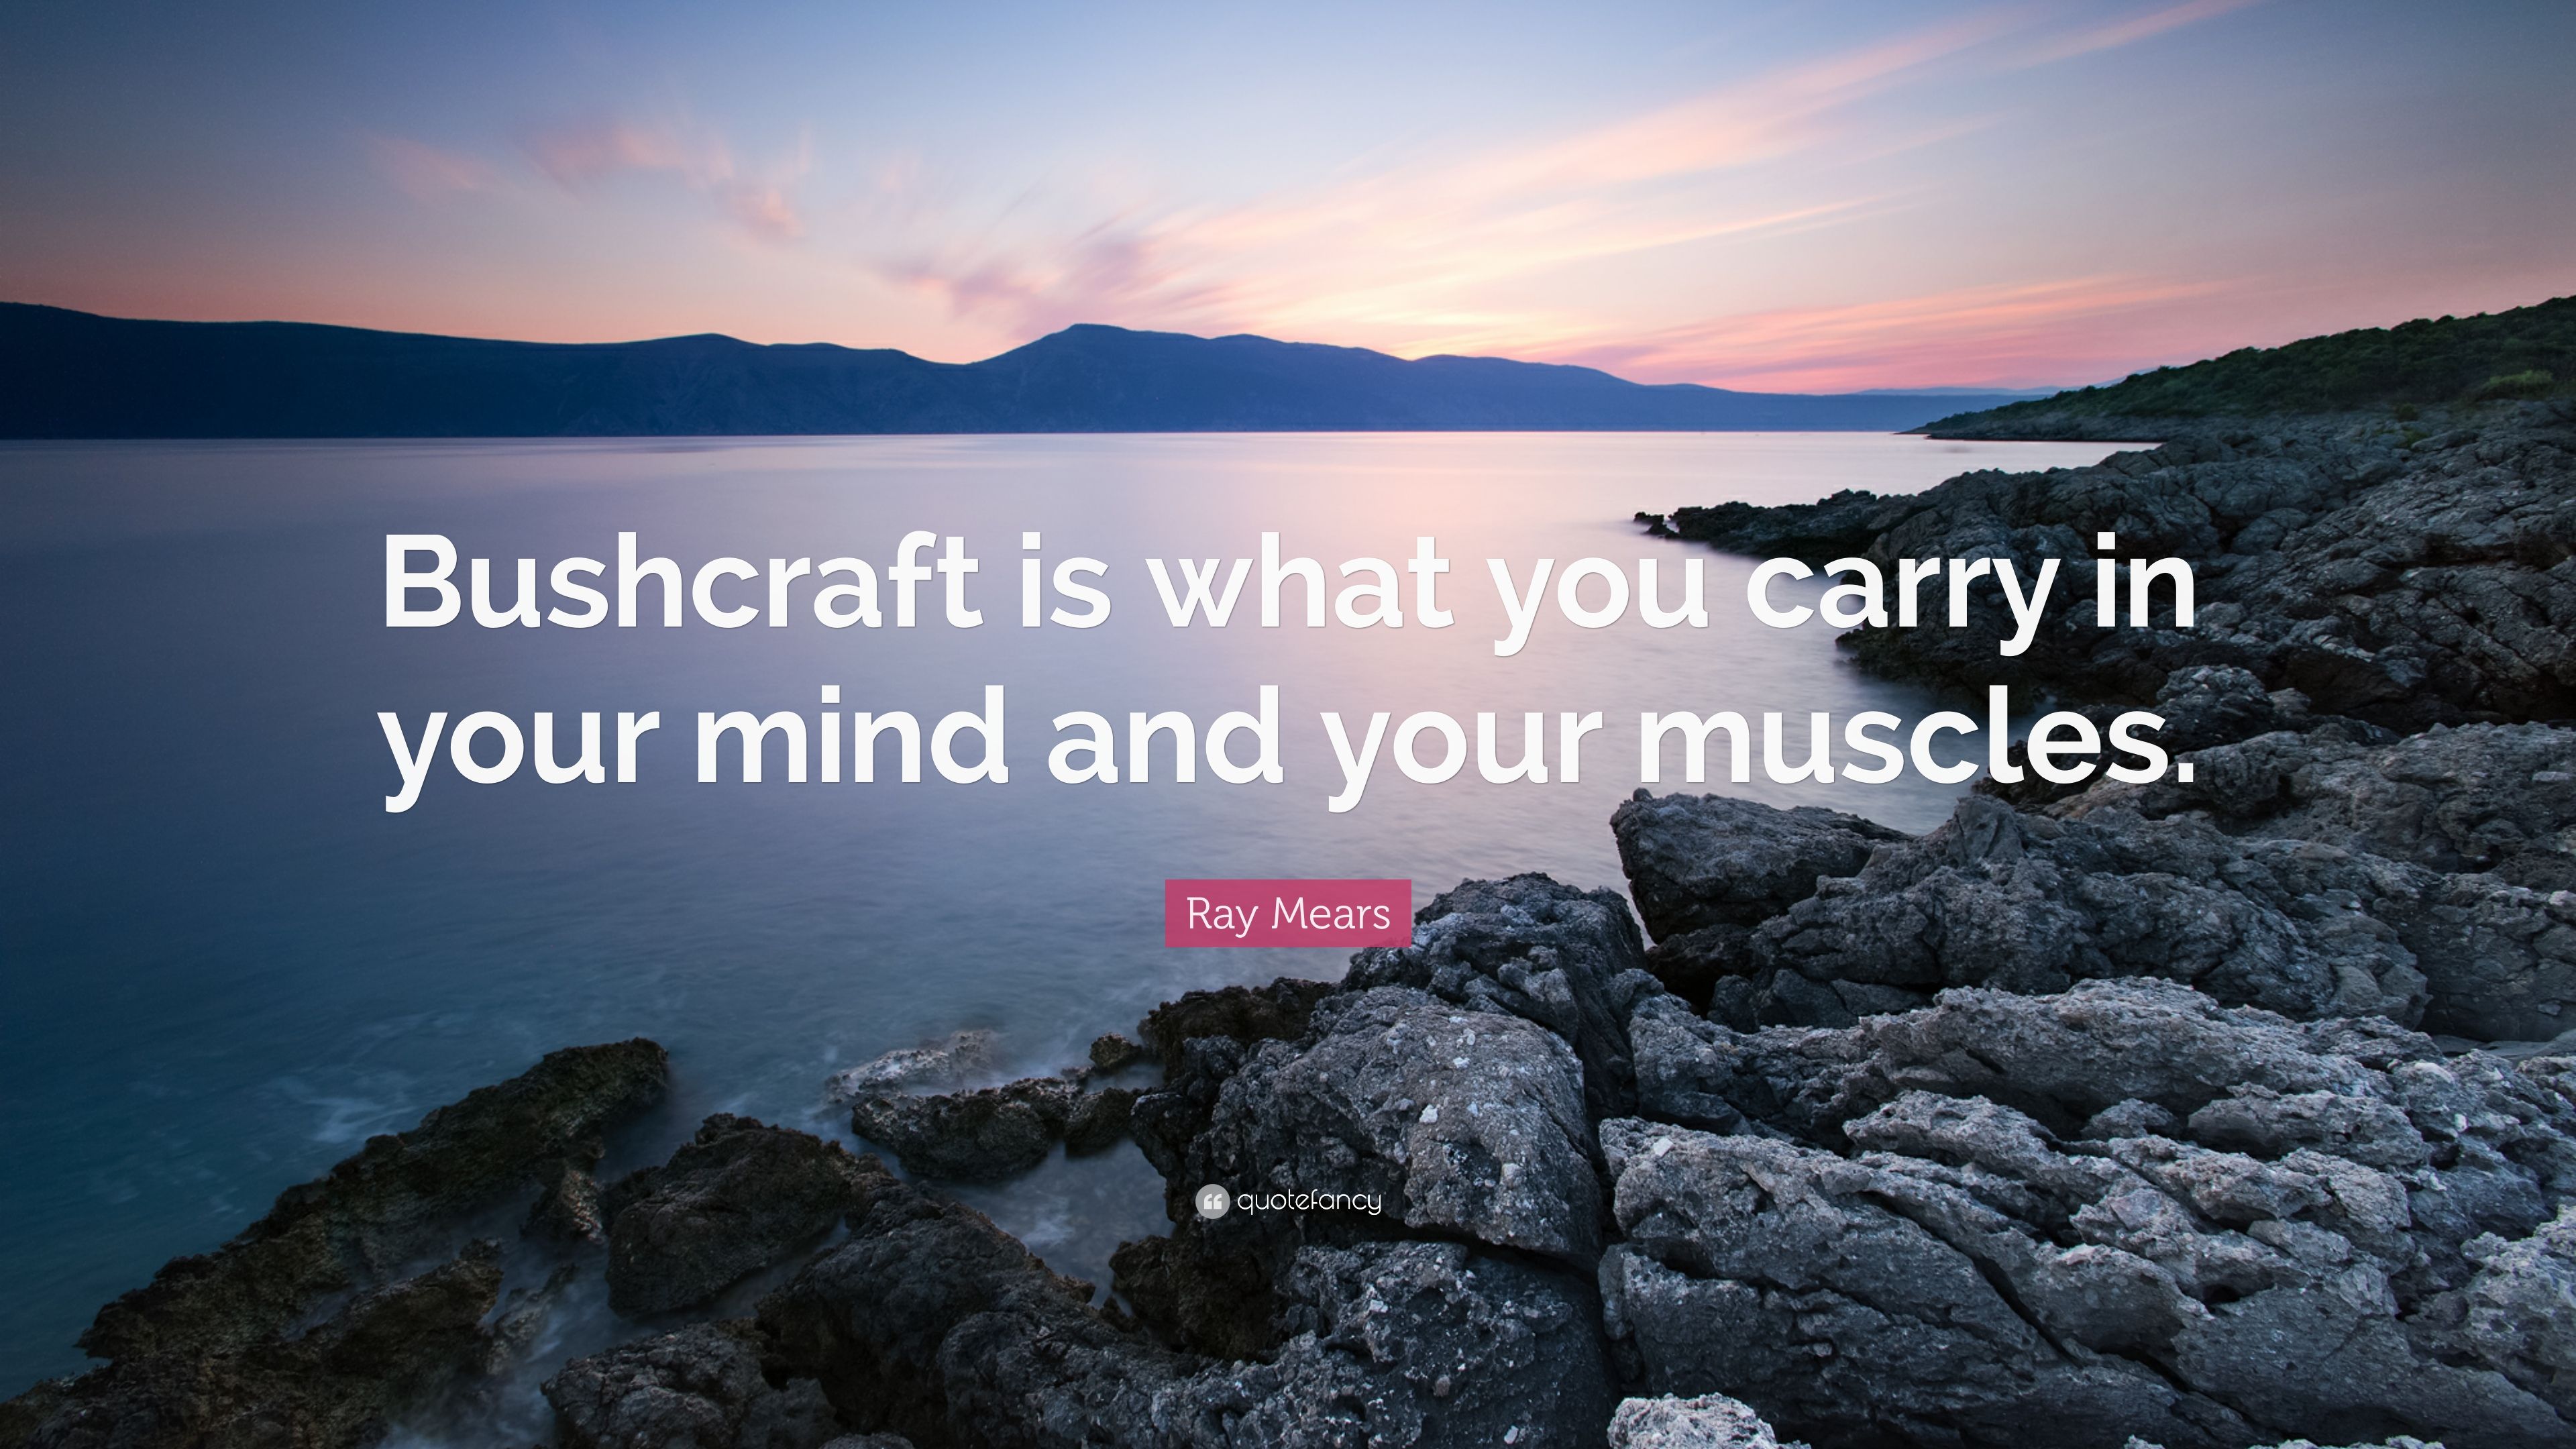 Ray Mears Quote: “Bushcraft is what you carry in your mind and your muscles.” (7 wallpaper)